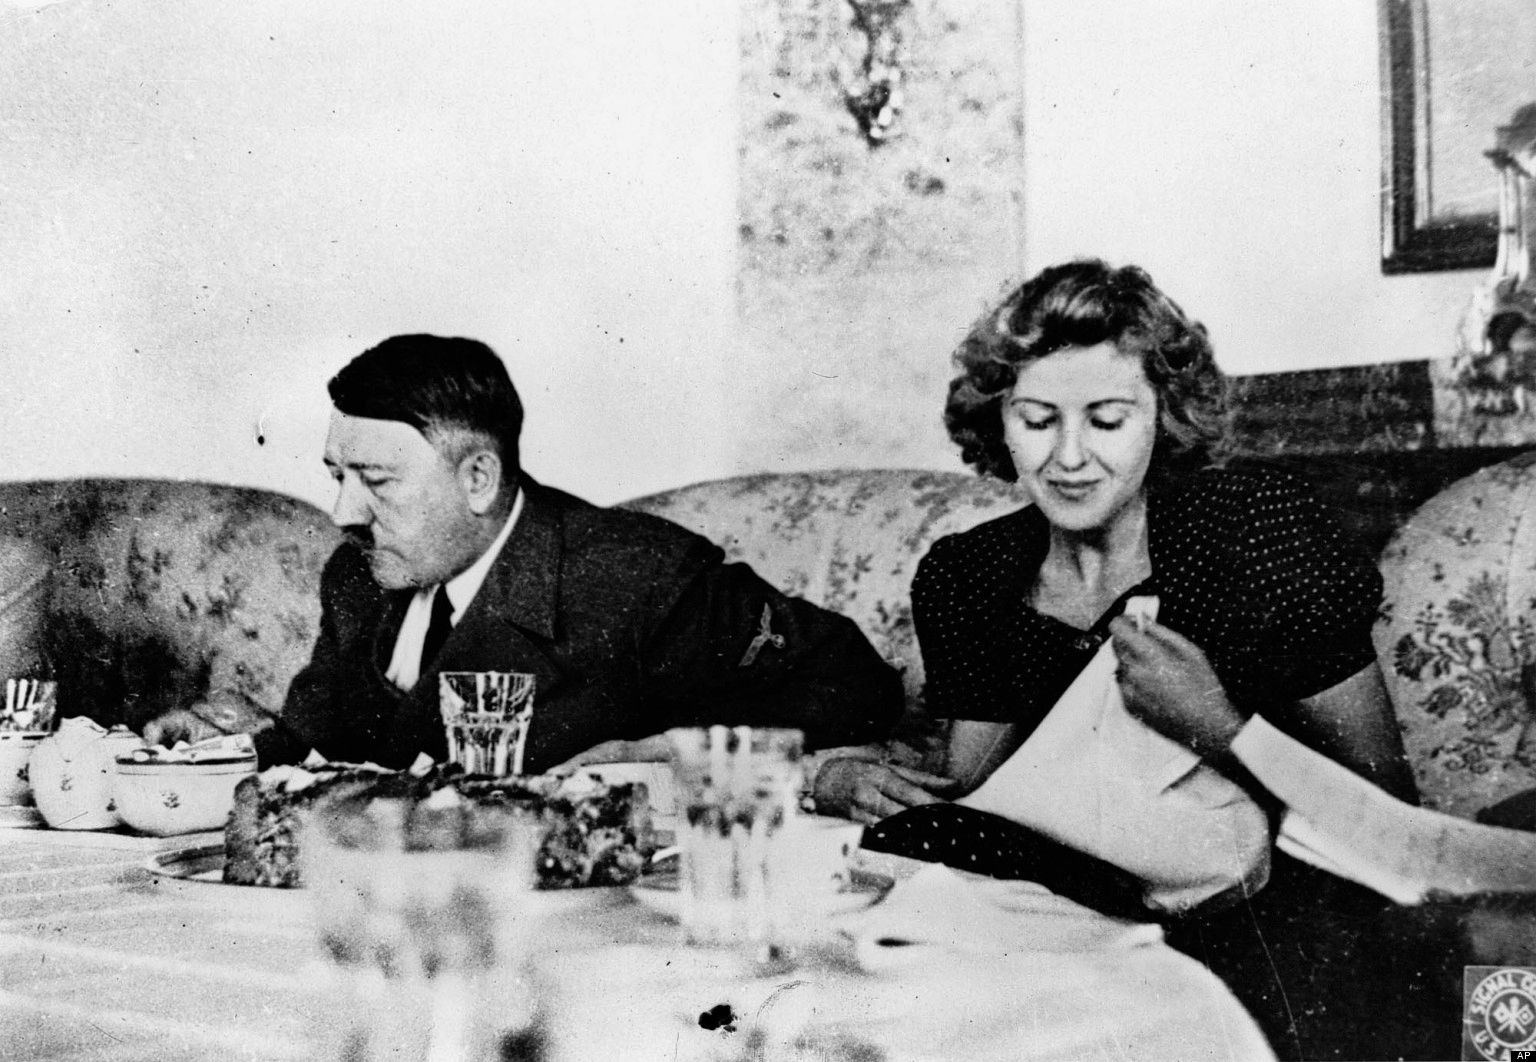 Margot Woelk photographed with Hitler during the war.